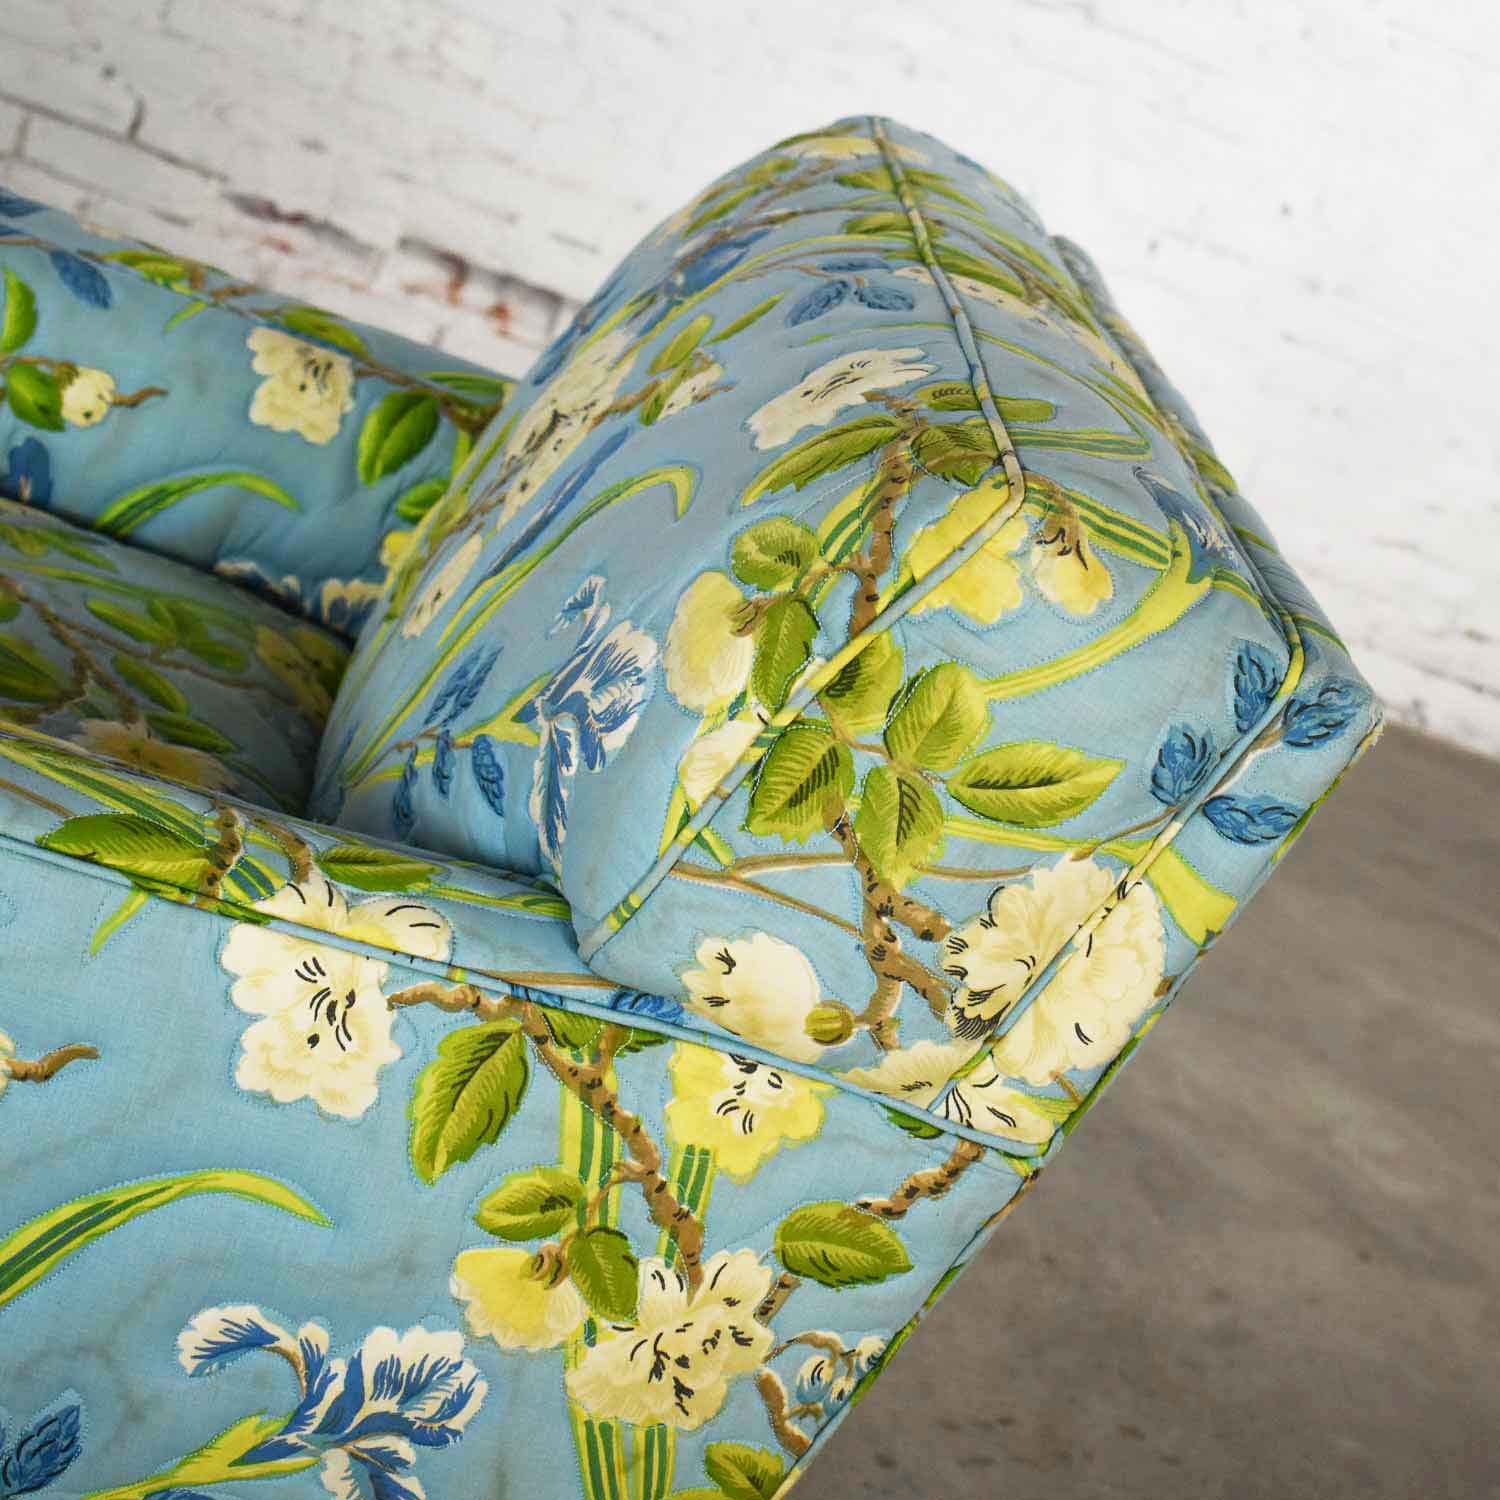 Blue Quilted Chintz Original Cabbage Rose Floral Hollywood Regency Club Chair Style Buatta or Parish